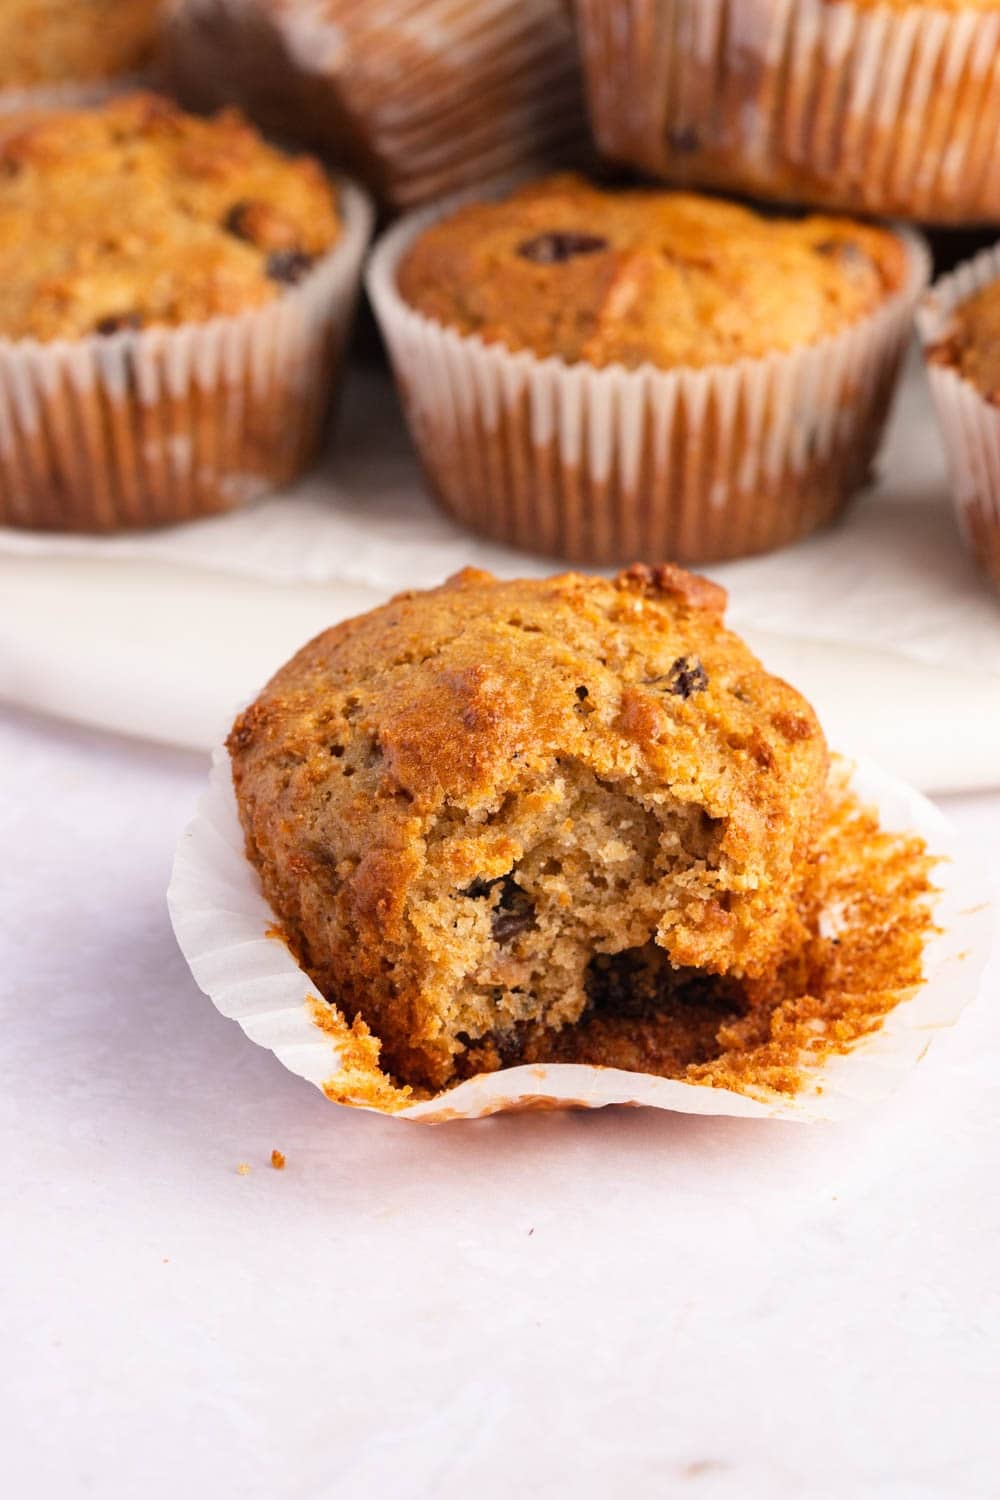 Homemade All-Bran Muffins on a White Background